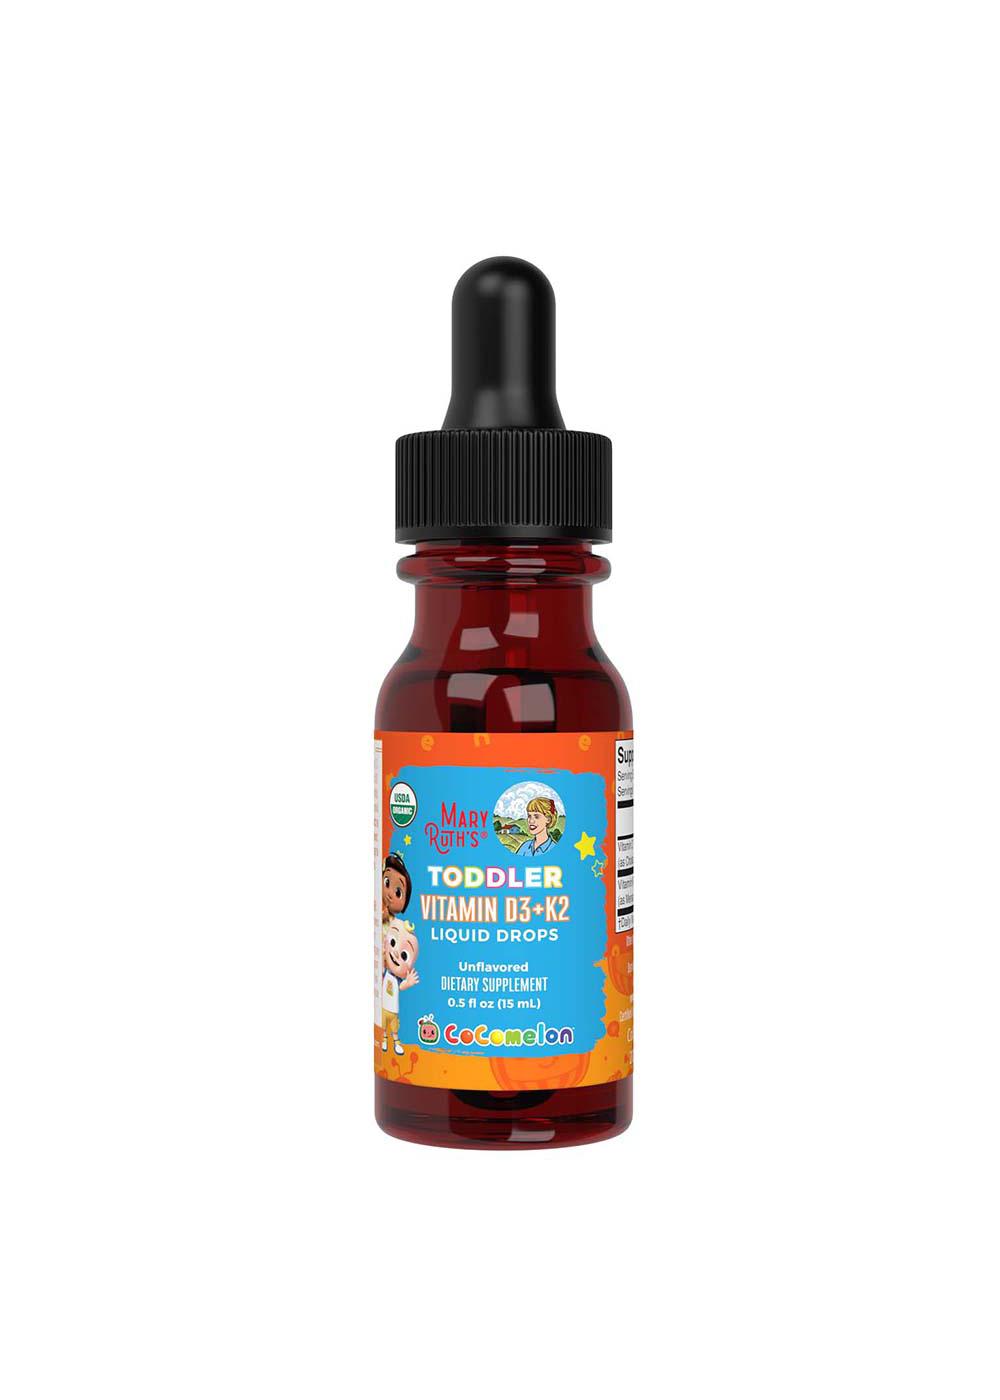 Mary Ruth's Toddler Vitamin D3+K2 Liquid Drops - Unflavored; image 2 of 2